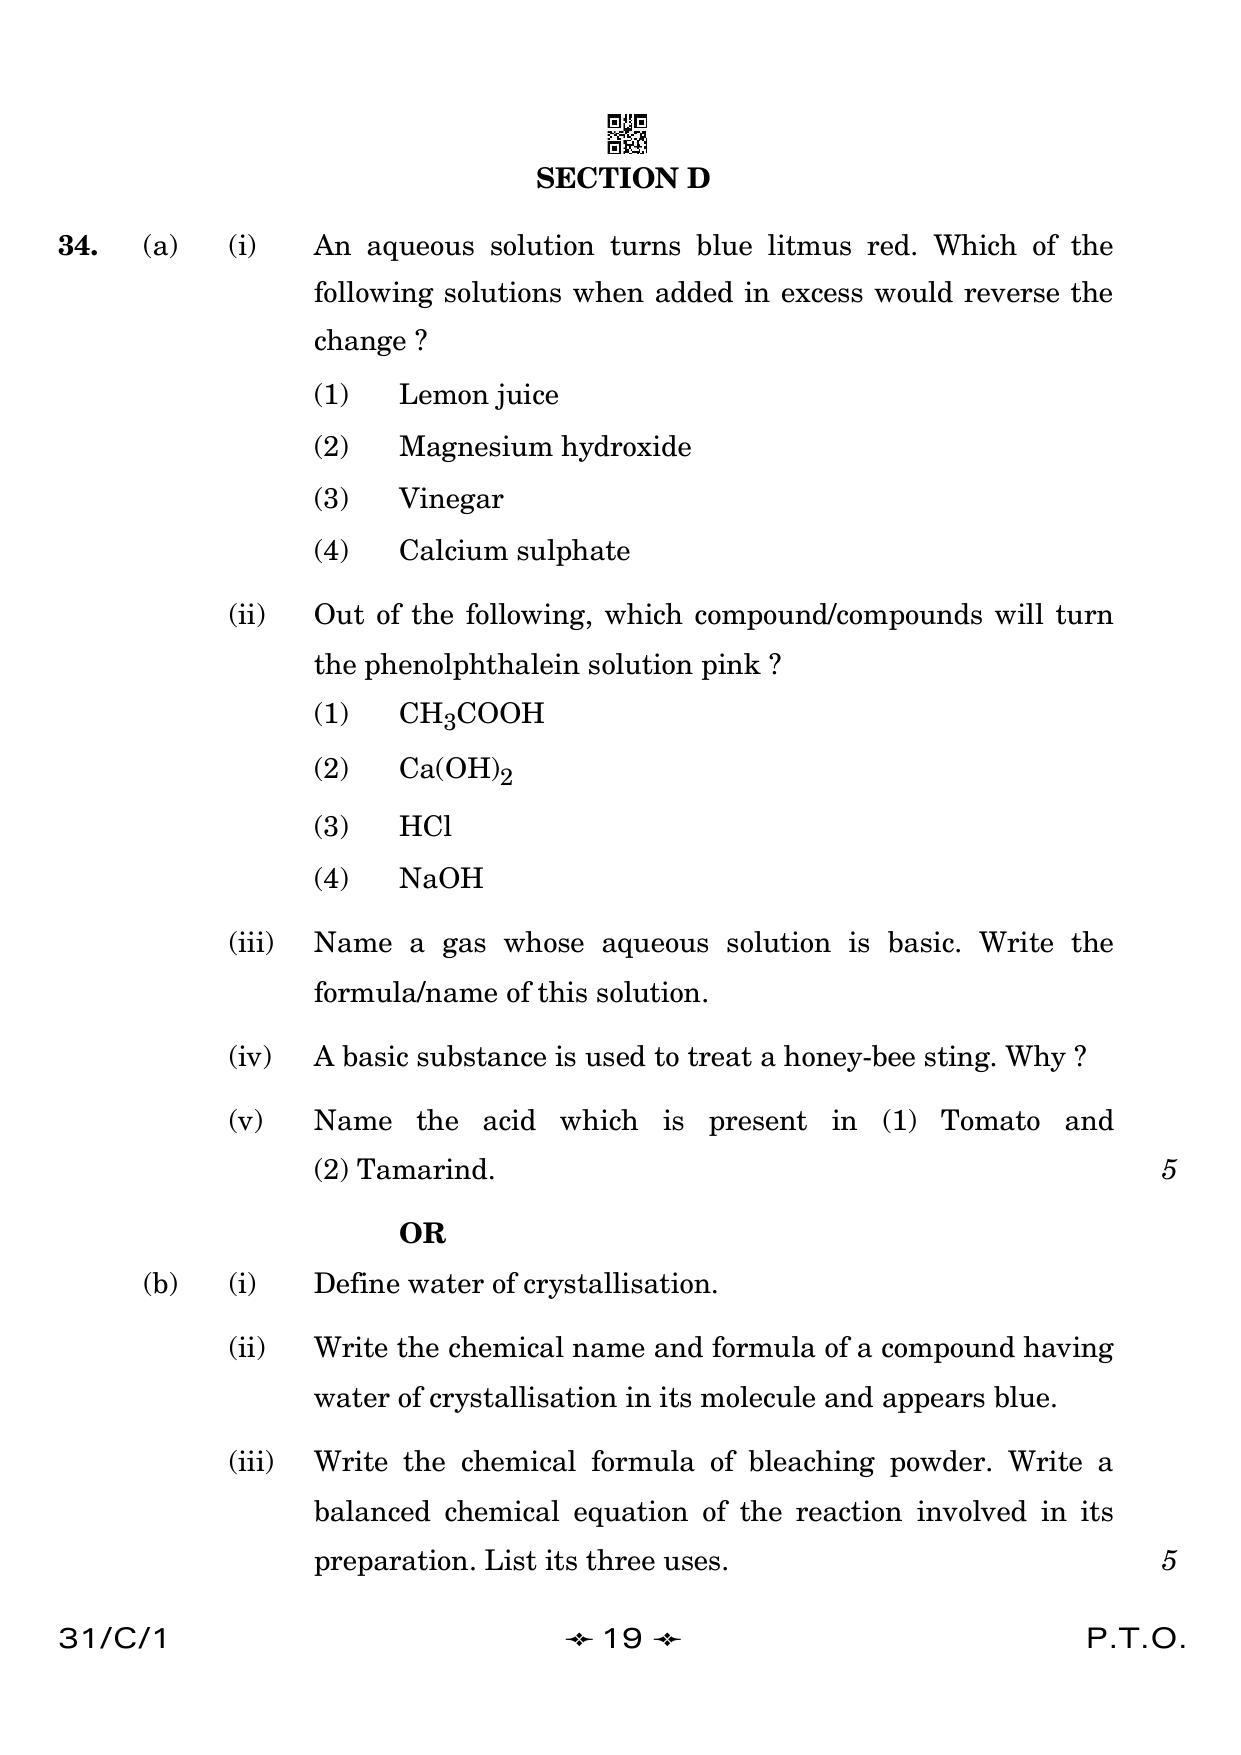 CBSE Class 10 31-1 Science 2023 (Compartment) Question Paper - Page 19